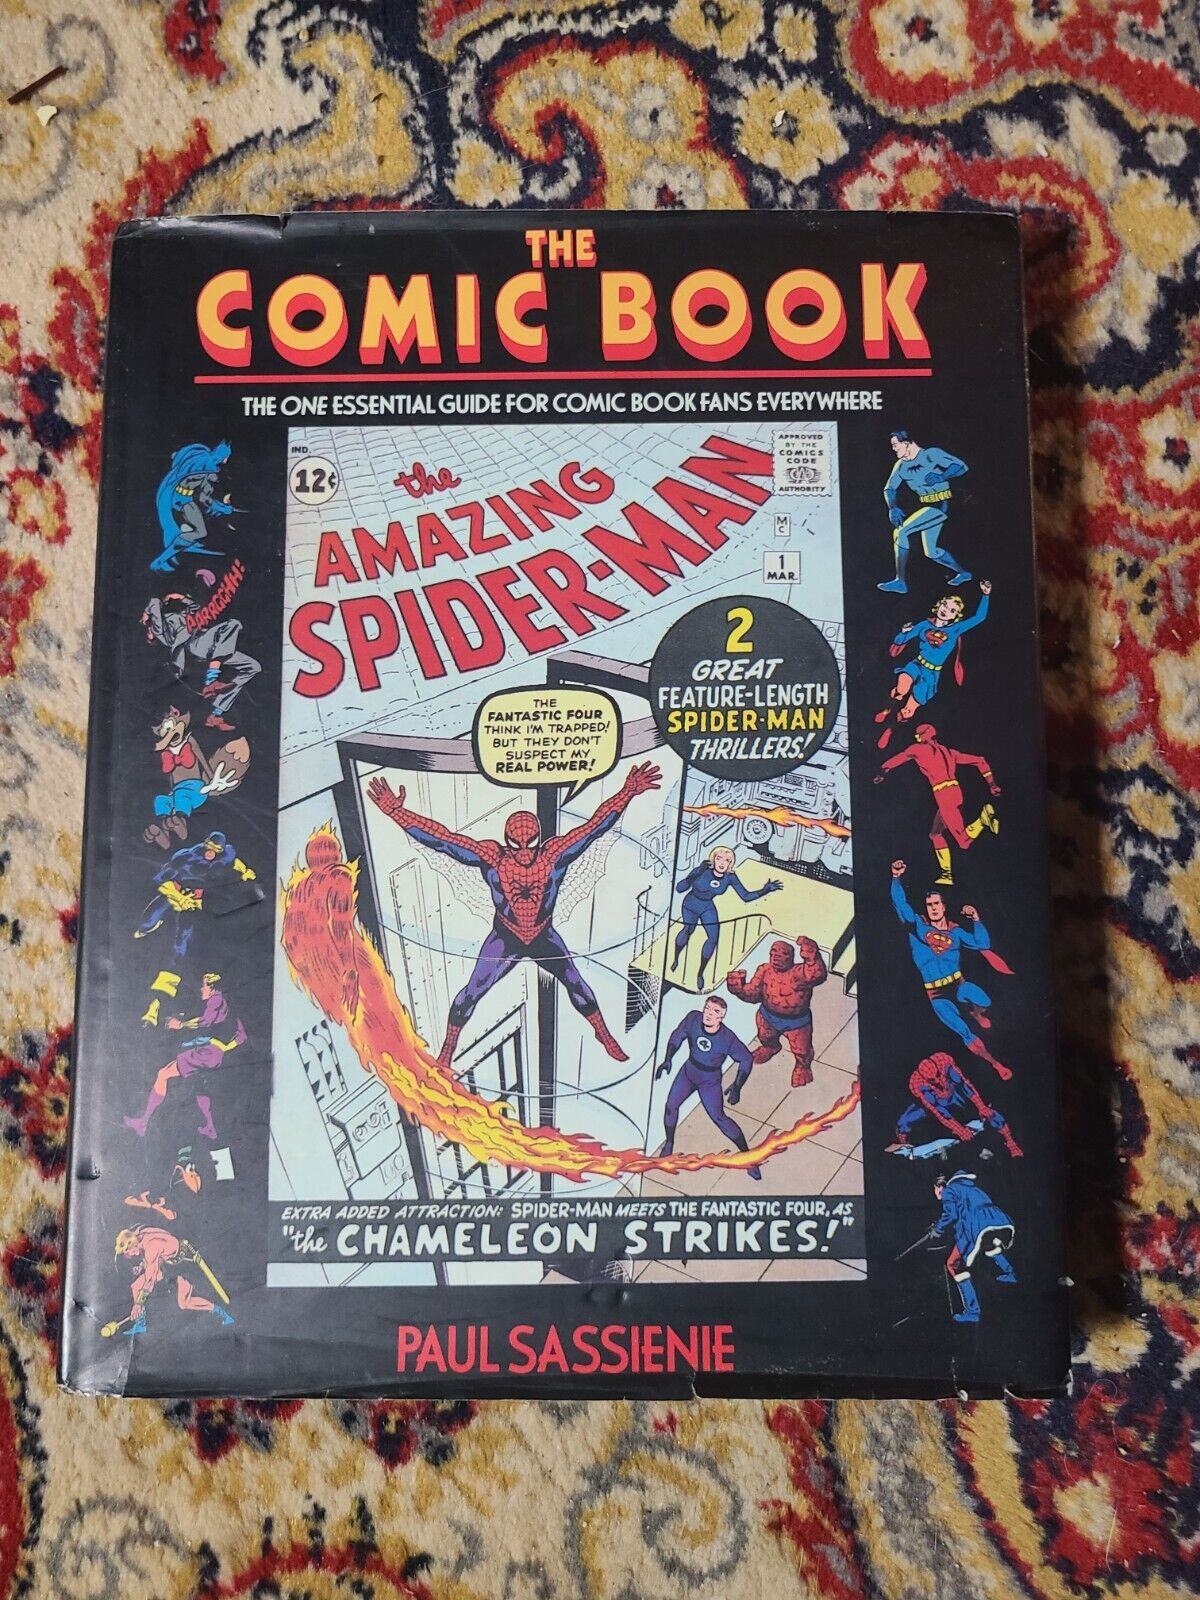 Vintage The Comic Book By PAUL SASSIENIE 1994 Chartwell Books Hard Cover